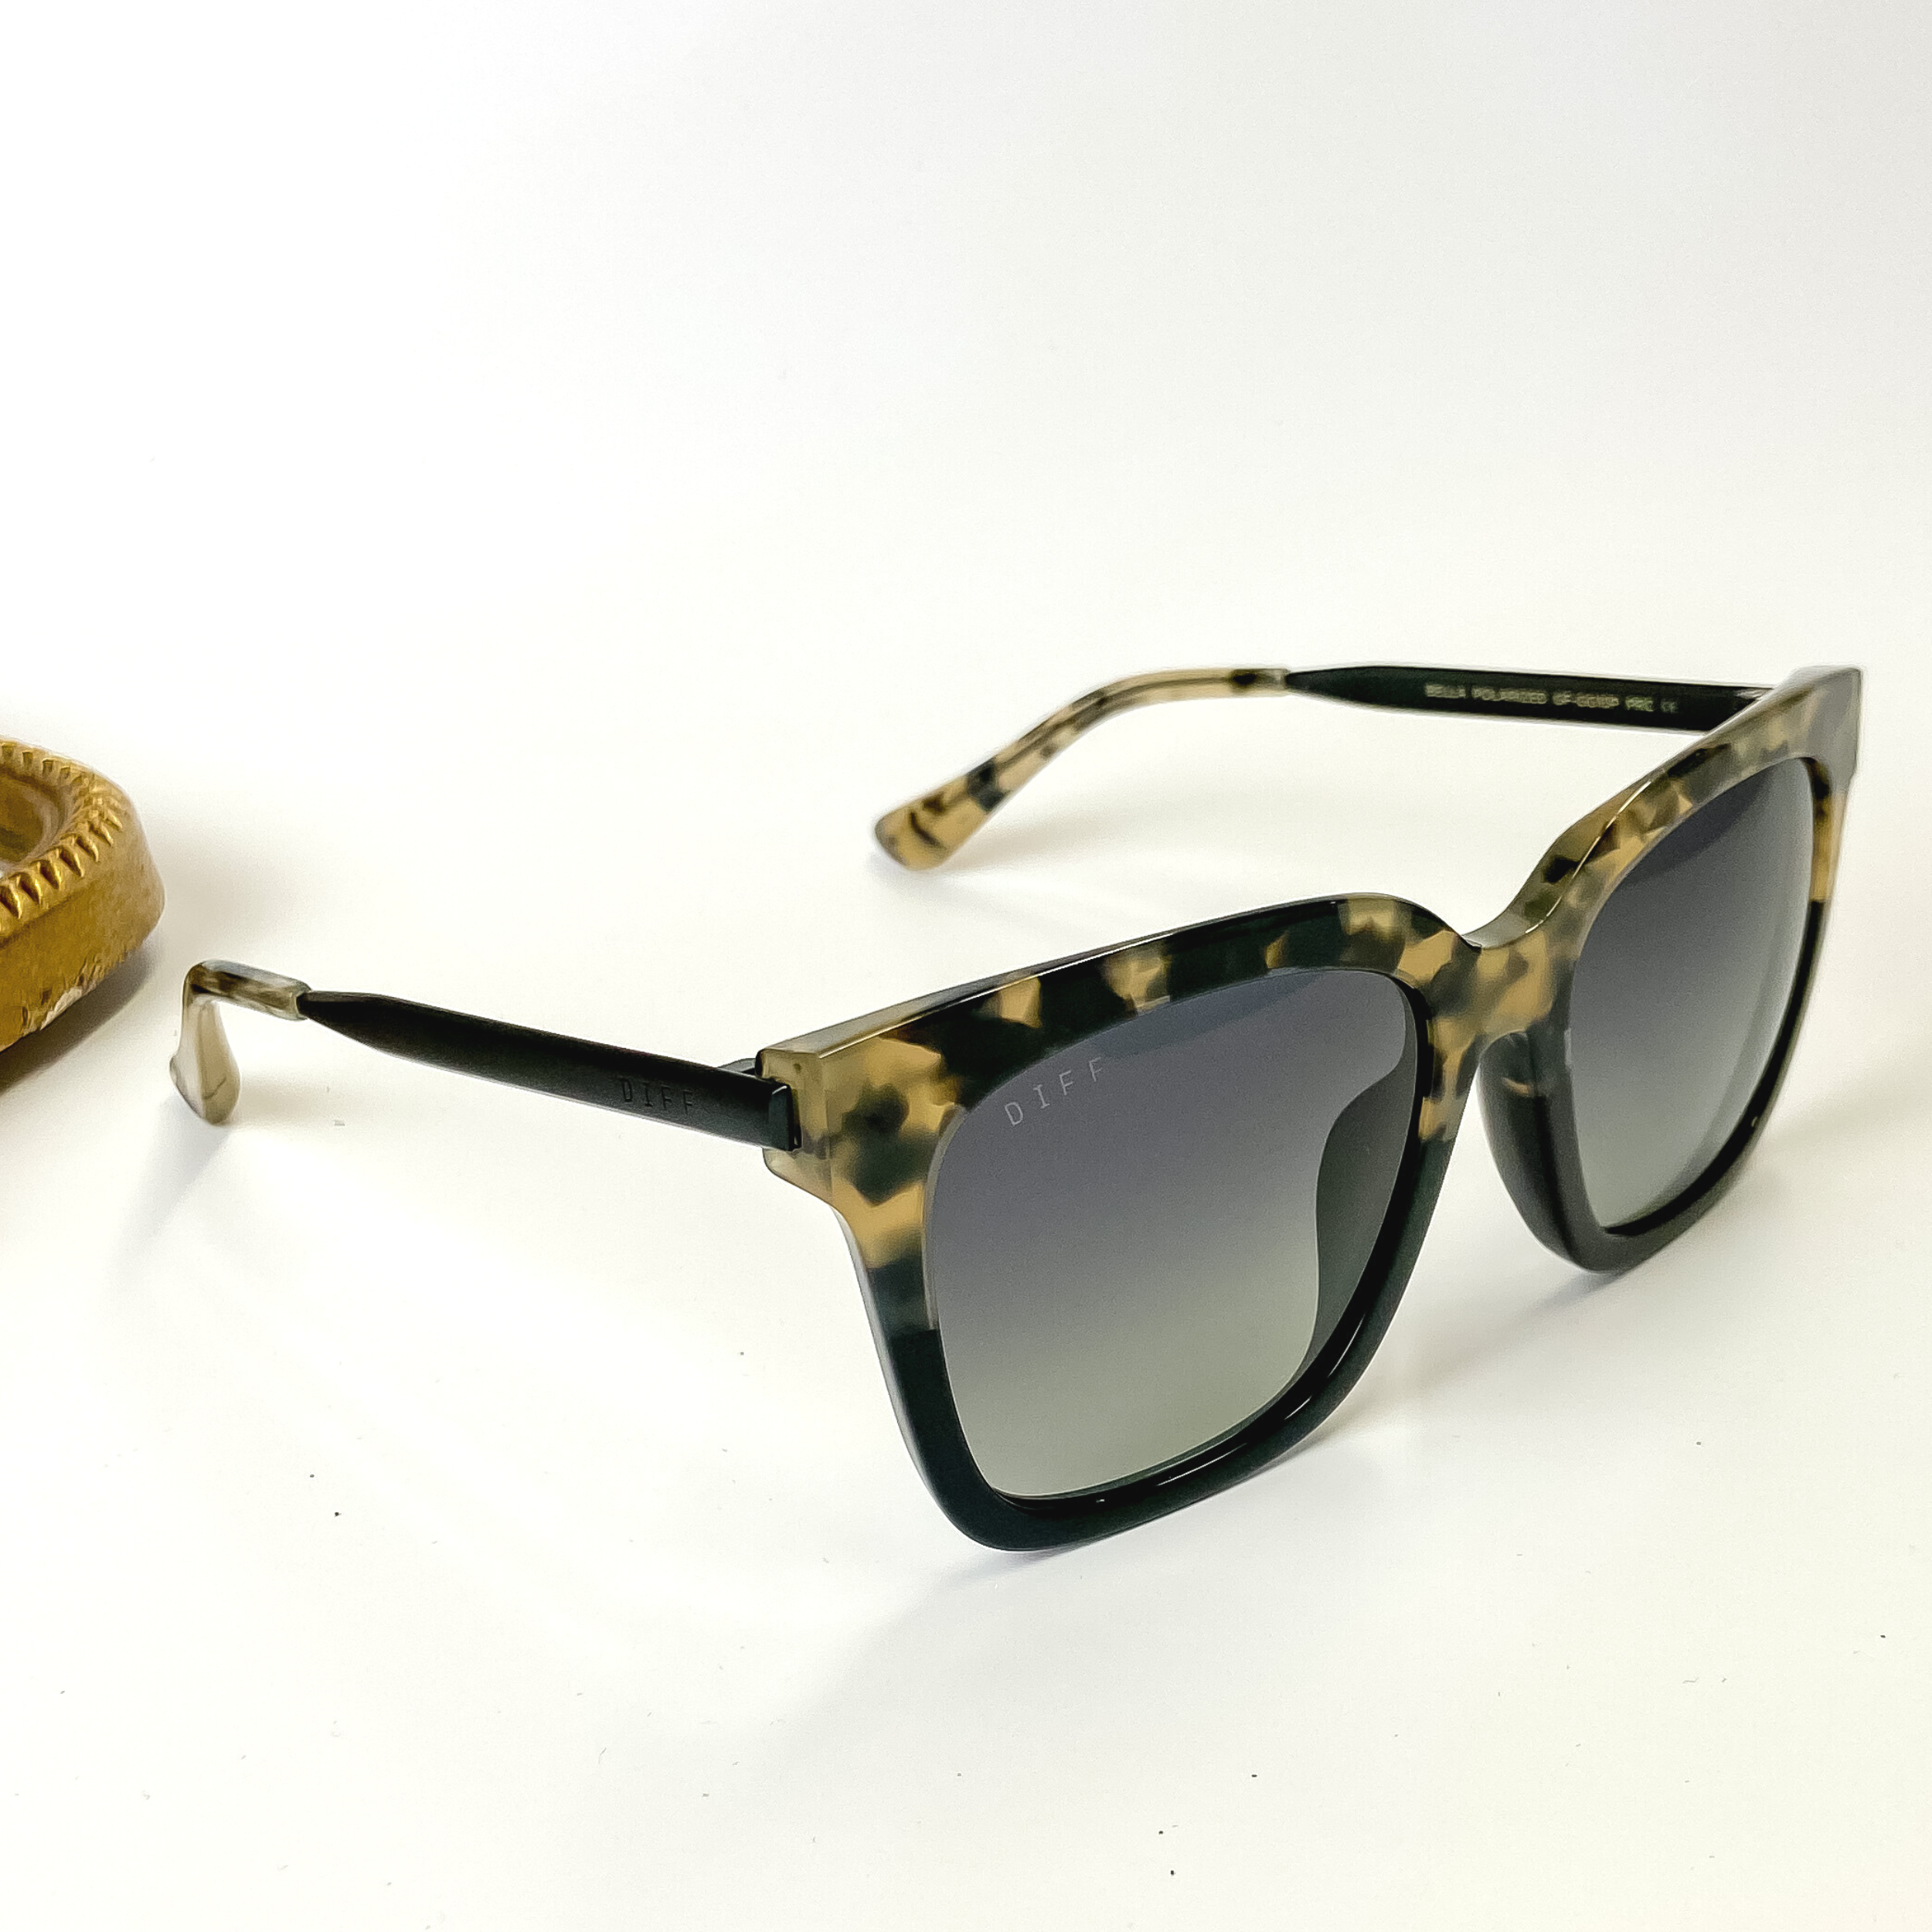 A pair of tortoise print and black frame sunglasses with grey gradient lenses. These sunglasses are pictured on a white background with gold jewelry.